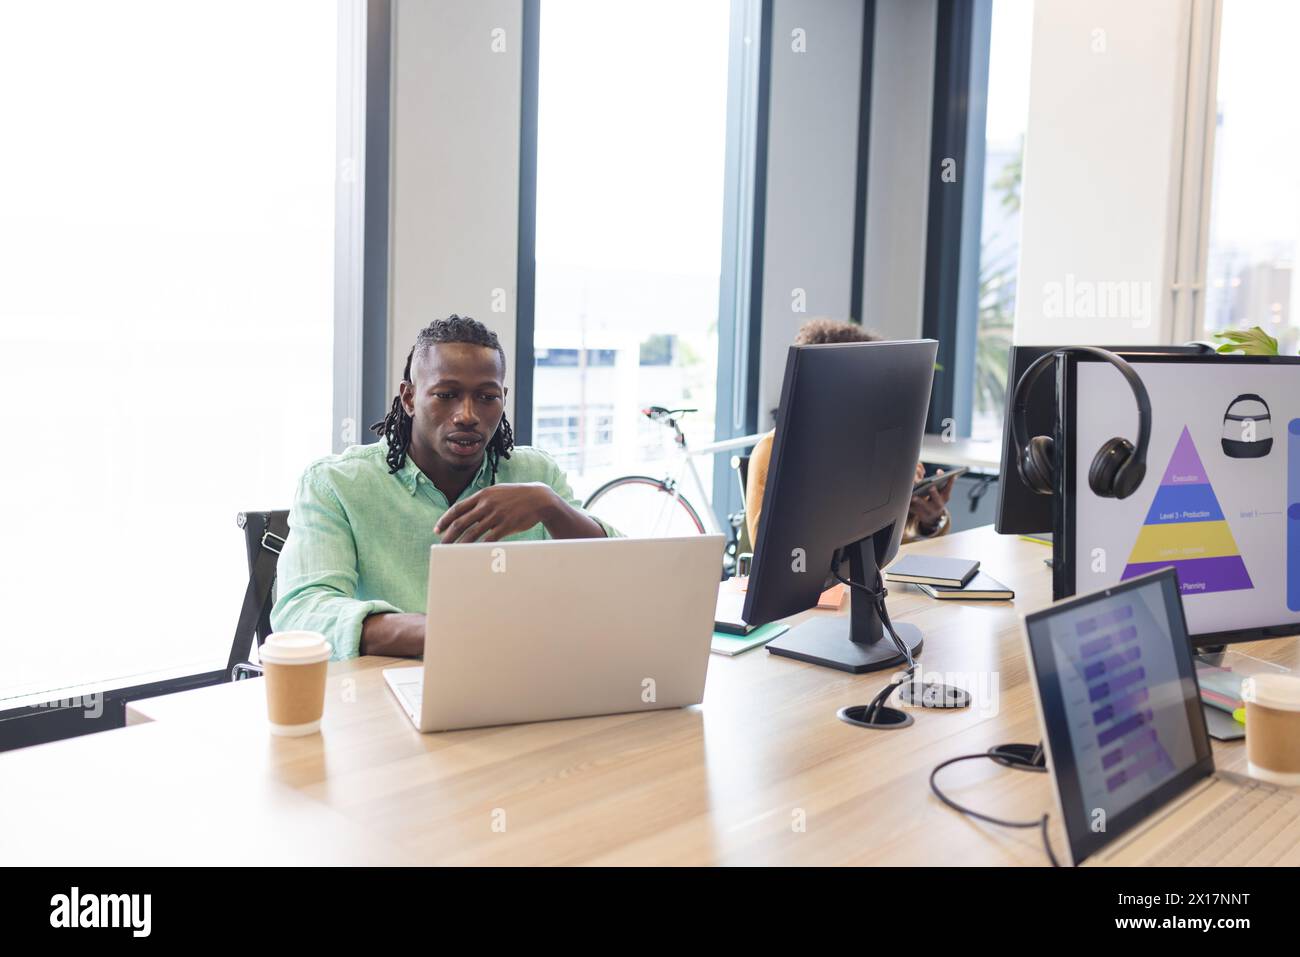 African American man with braided hair working on a laptop in a modern business office Stock Photo